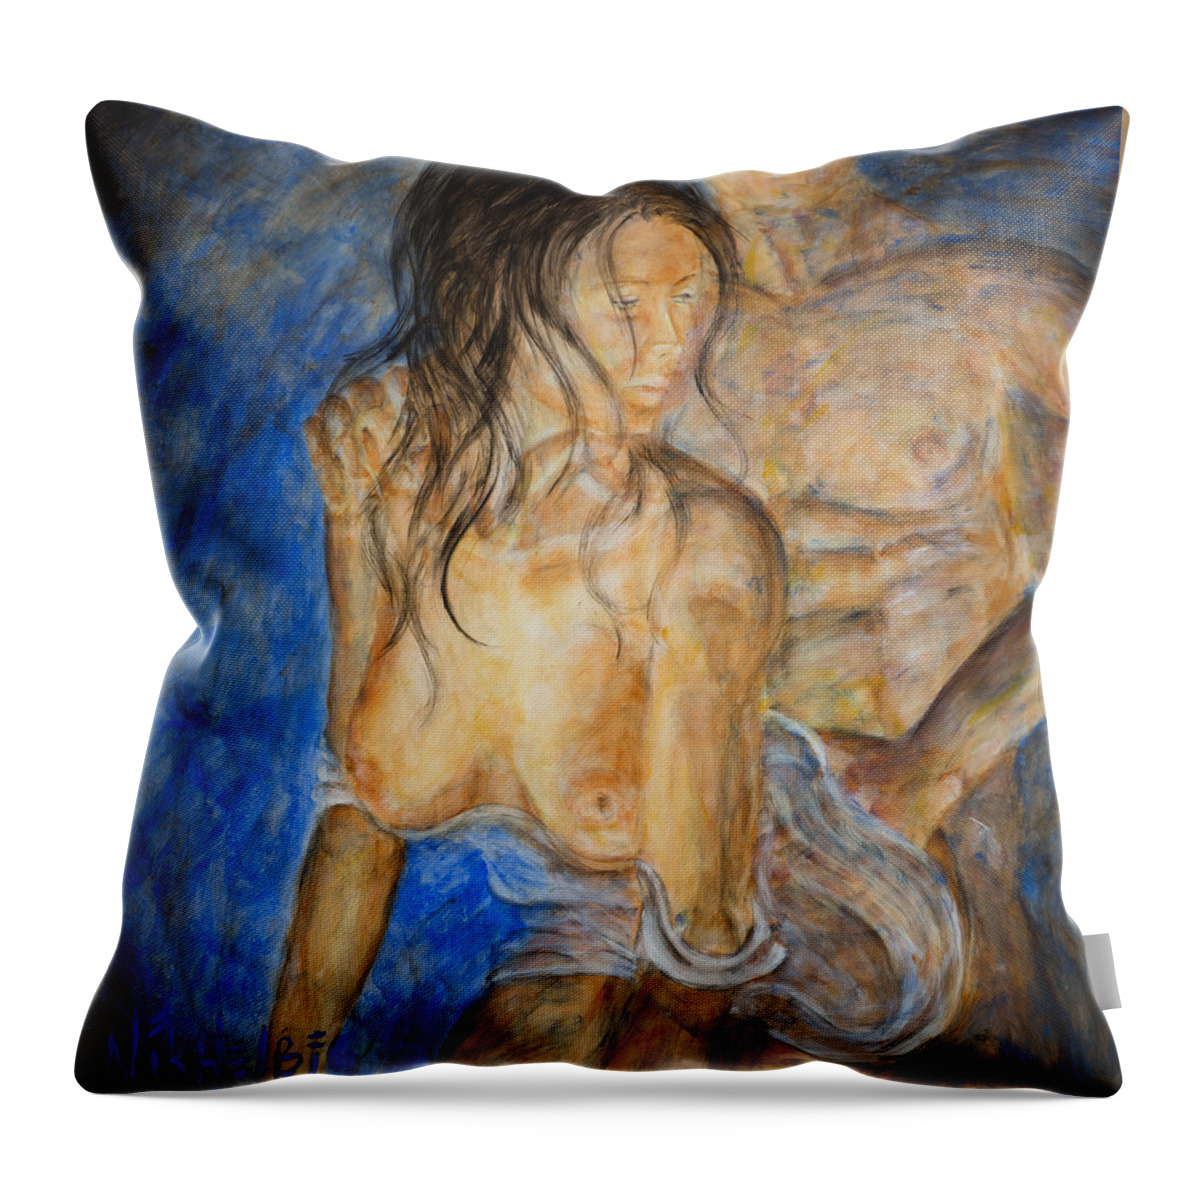 Erotic Throw Pillow featuring the painting Erotica II by Nik Helbig